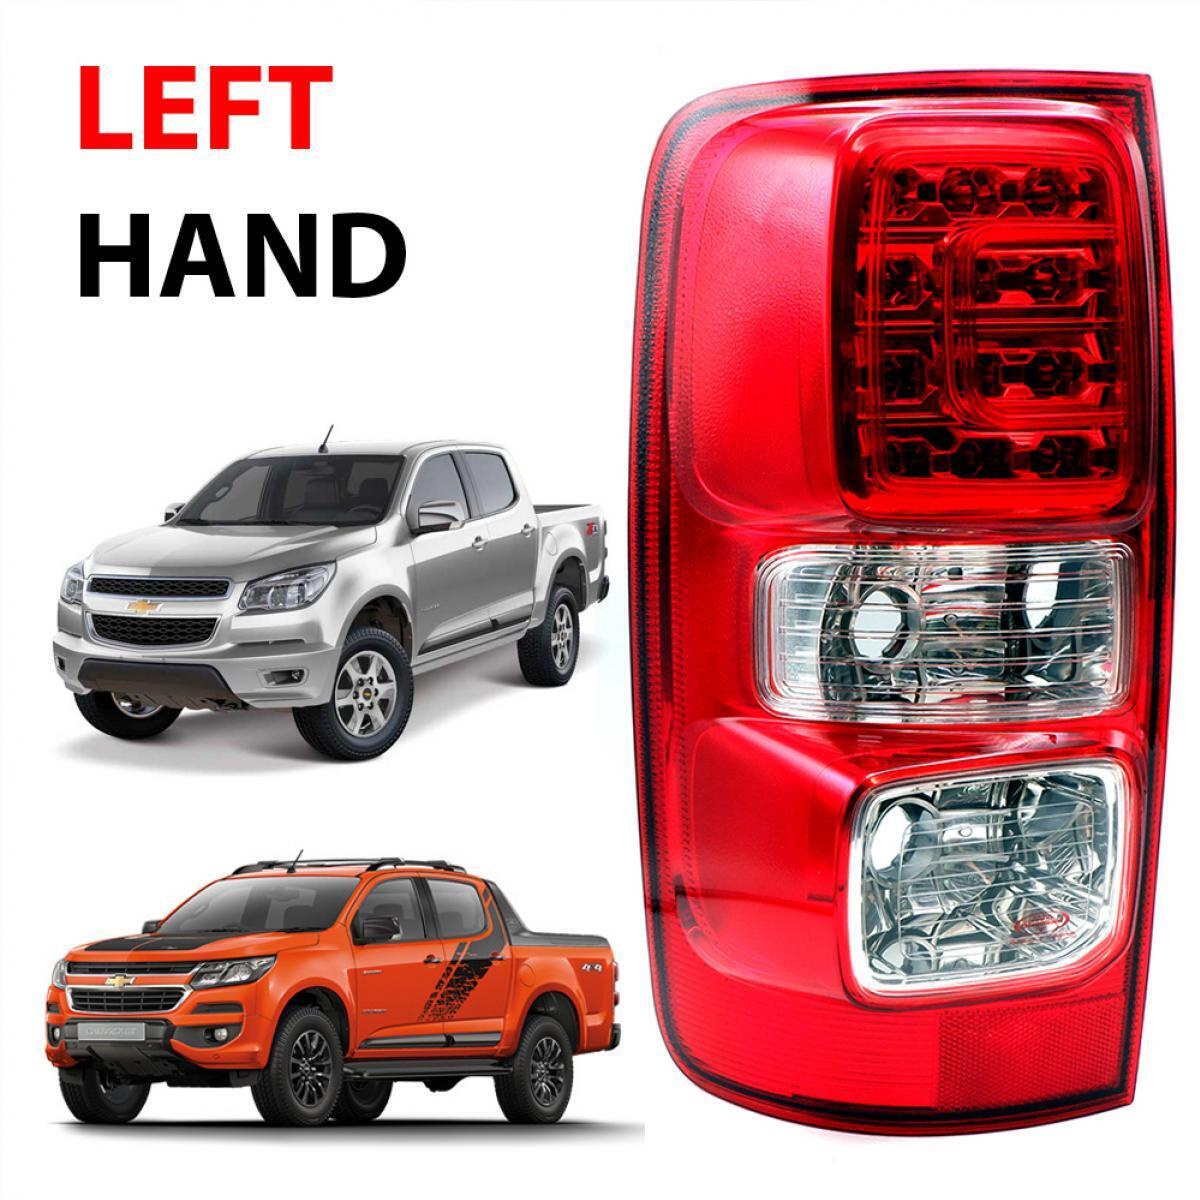 Rear LH LED Tail Lamp For Cheverolet Colorado Holden LTZ 2.8 Pick up 2013 - 2019